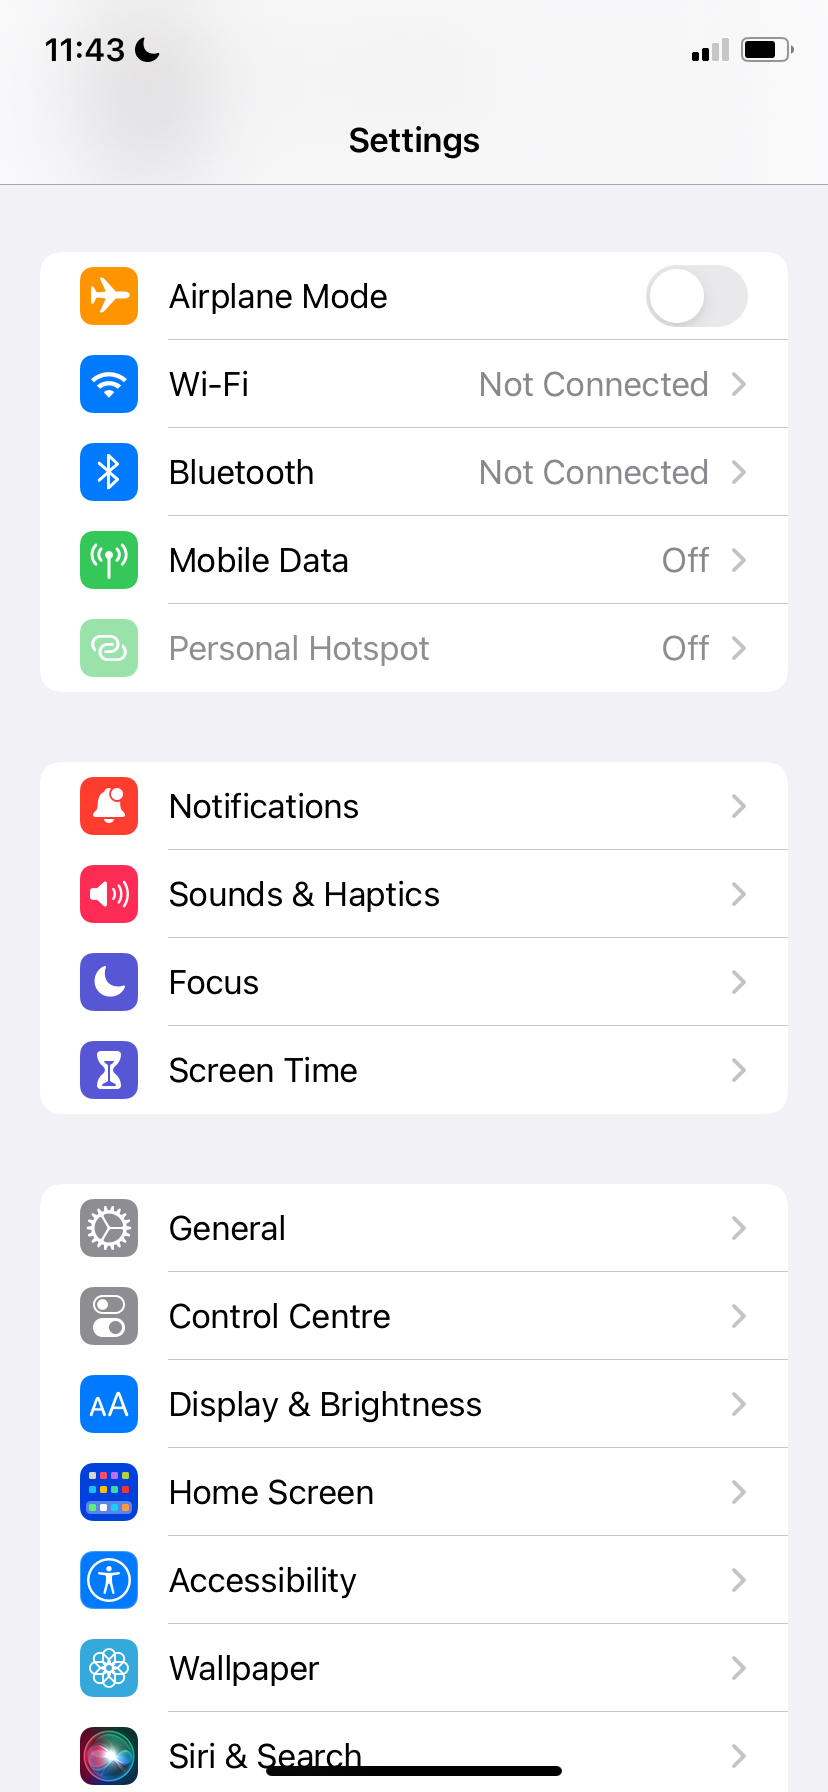 Home screen of the Settings app in iOS 15